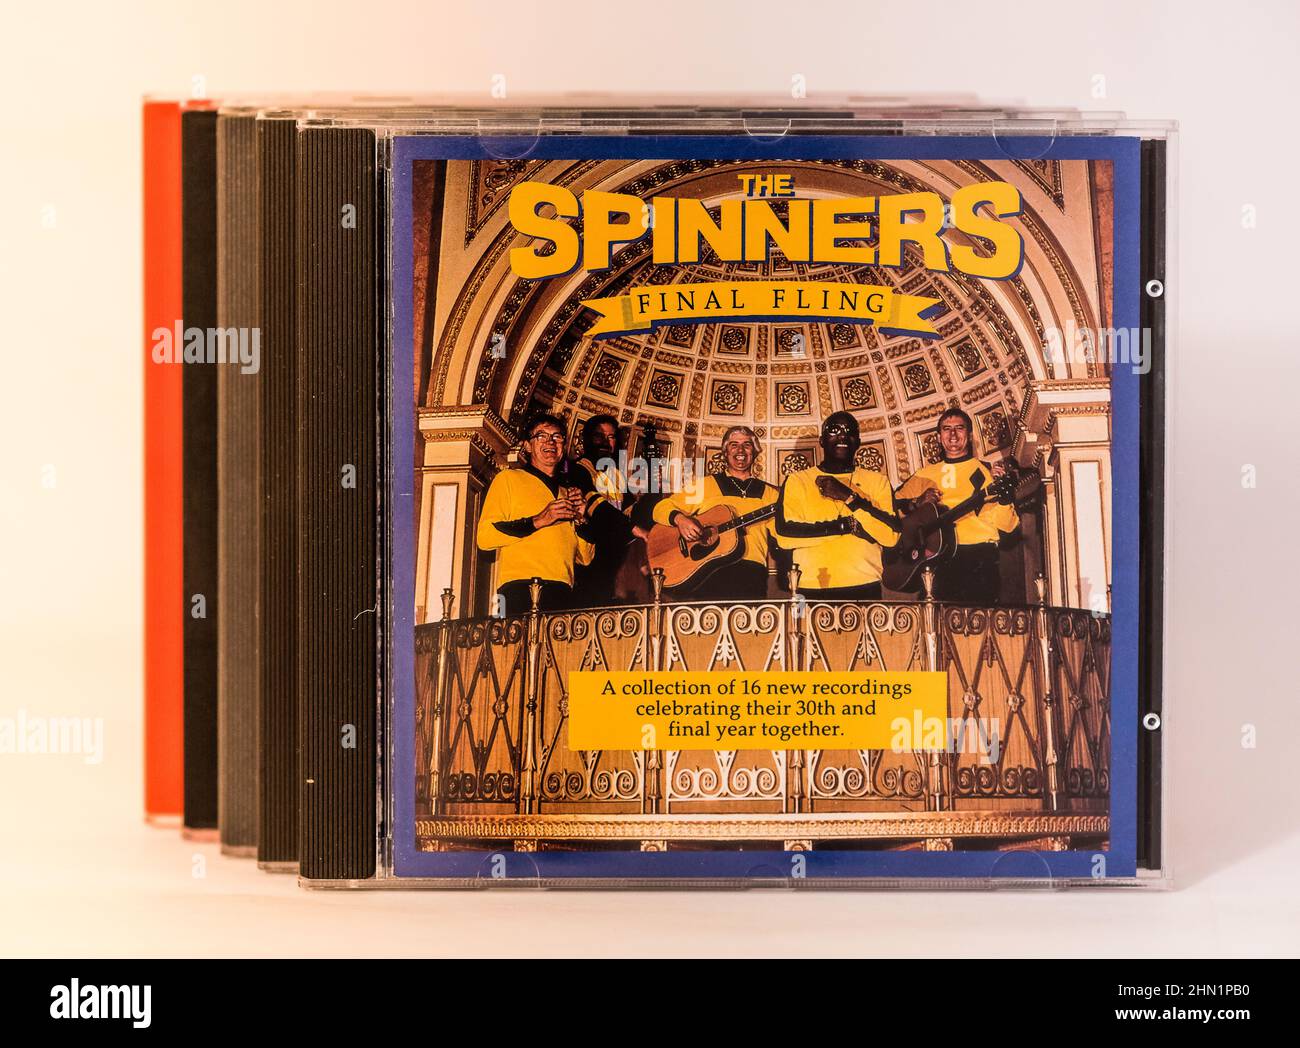 Memories of EMI - The Spinners Compact Disc. Stock Photo